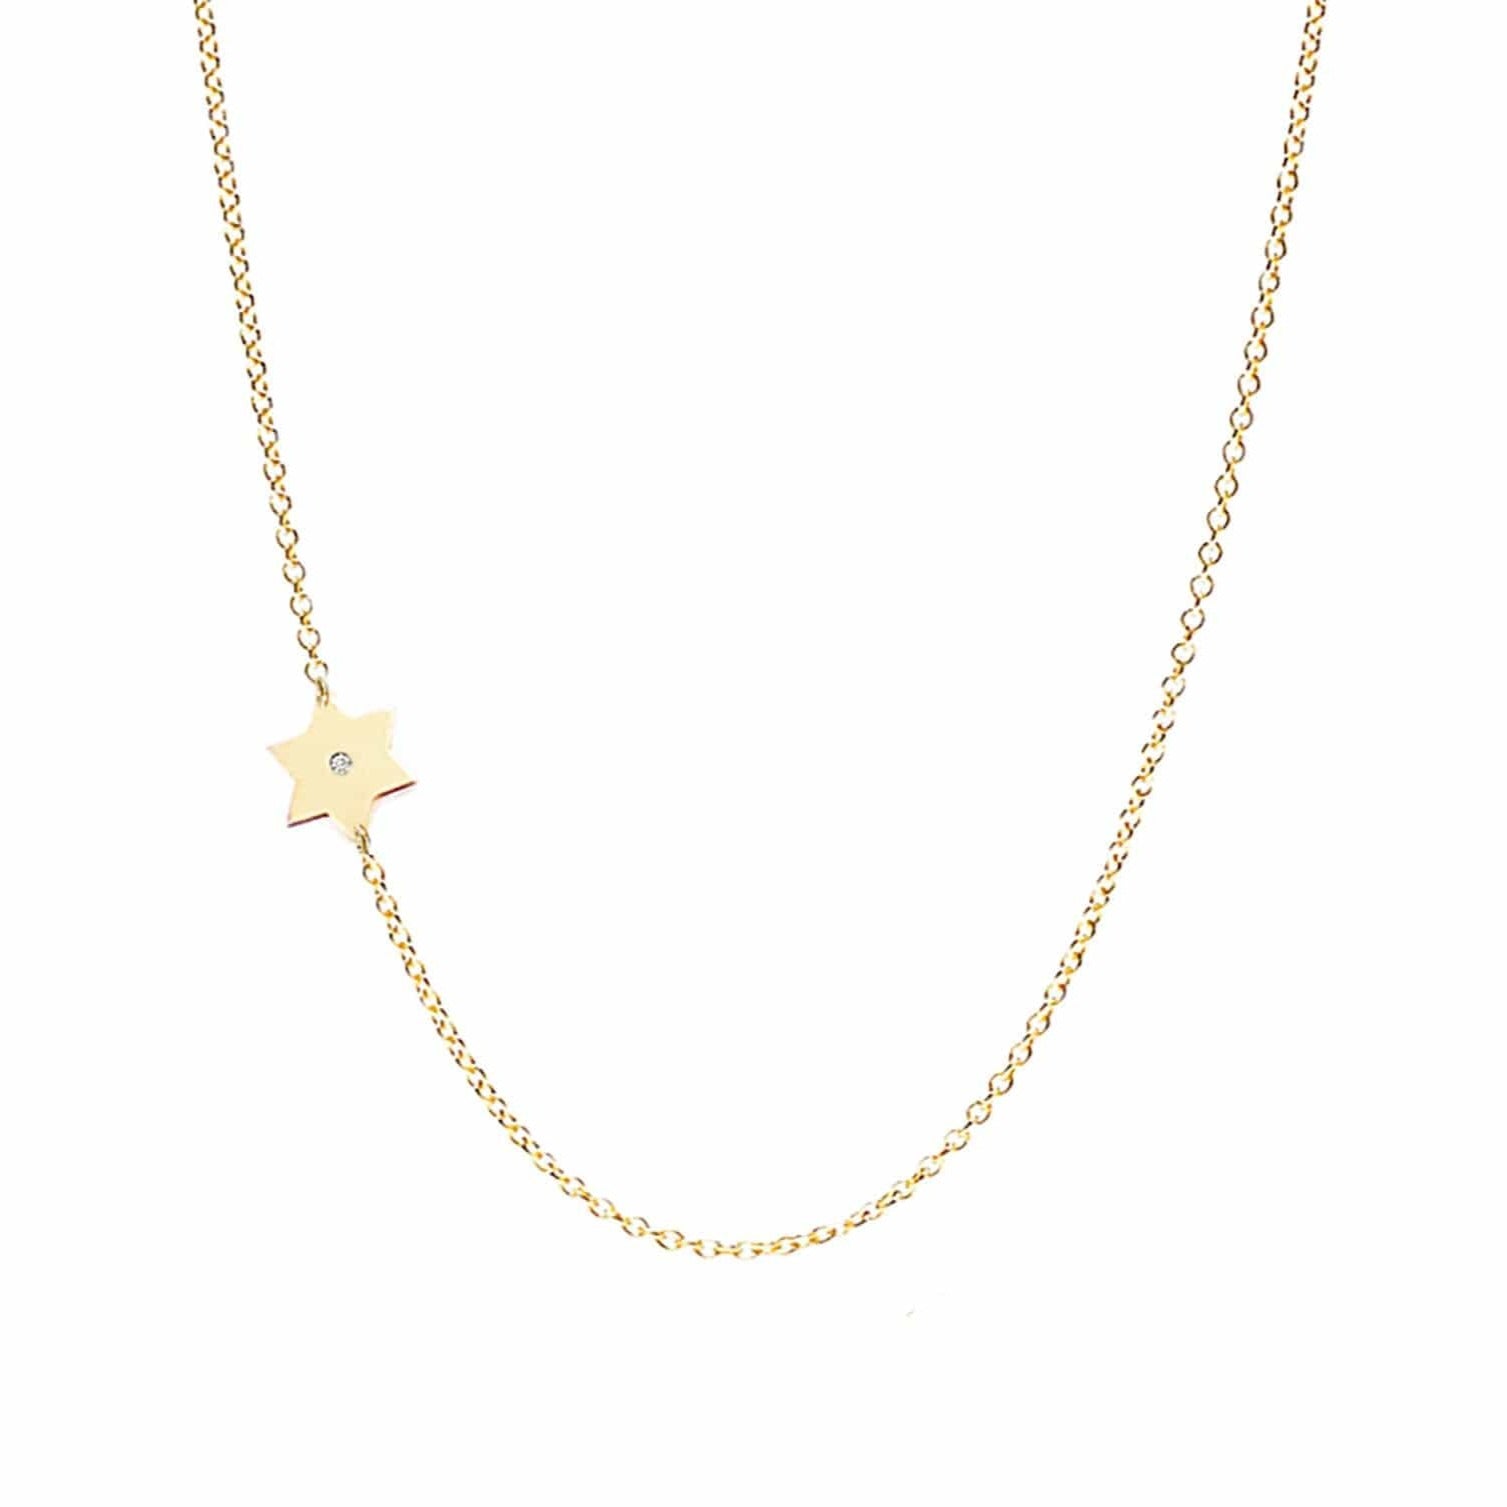 Miriam Merenfeld Jewelry Necklaces Gold Classic Star of David Necklace - Gold-Plated or Sterling Silver